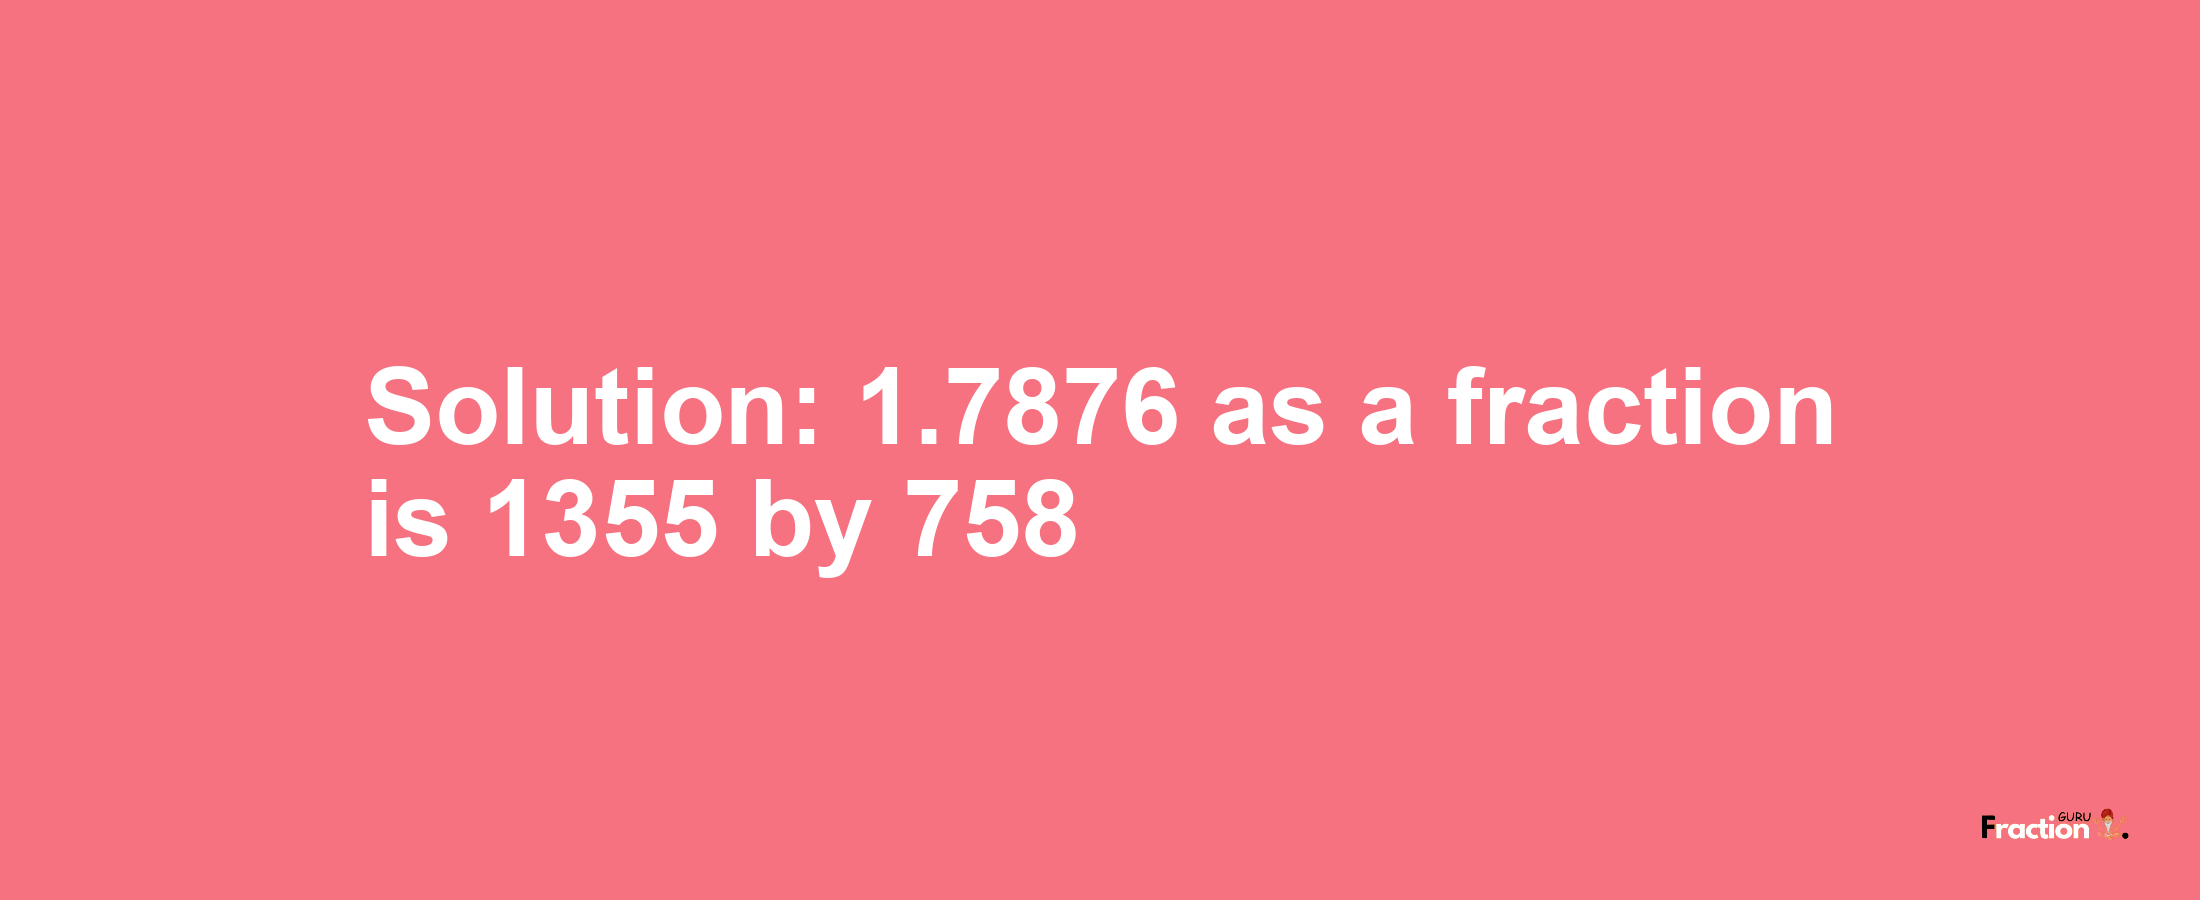 Solution:1.7876 as a fraction is 1355/758